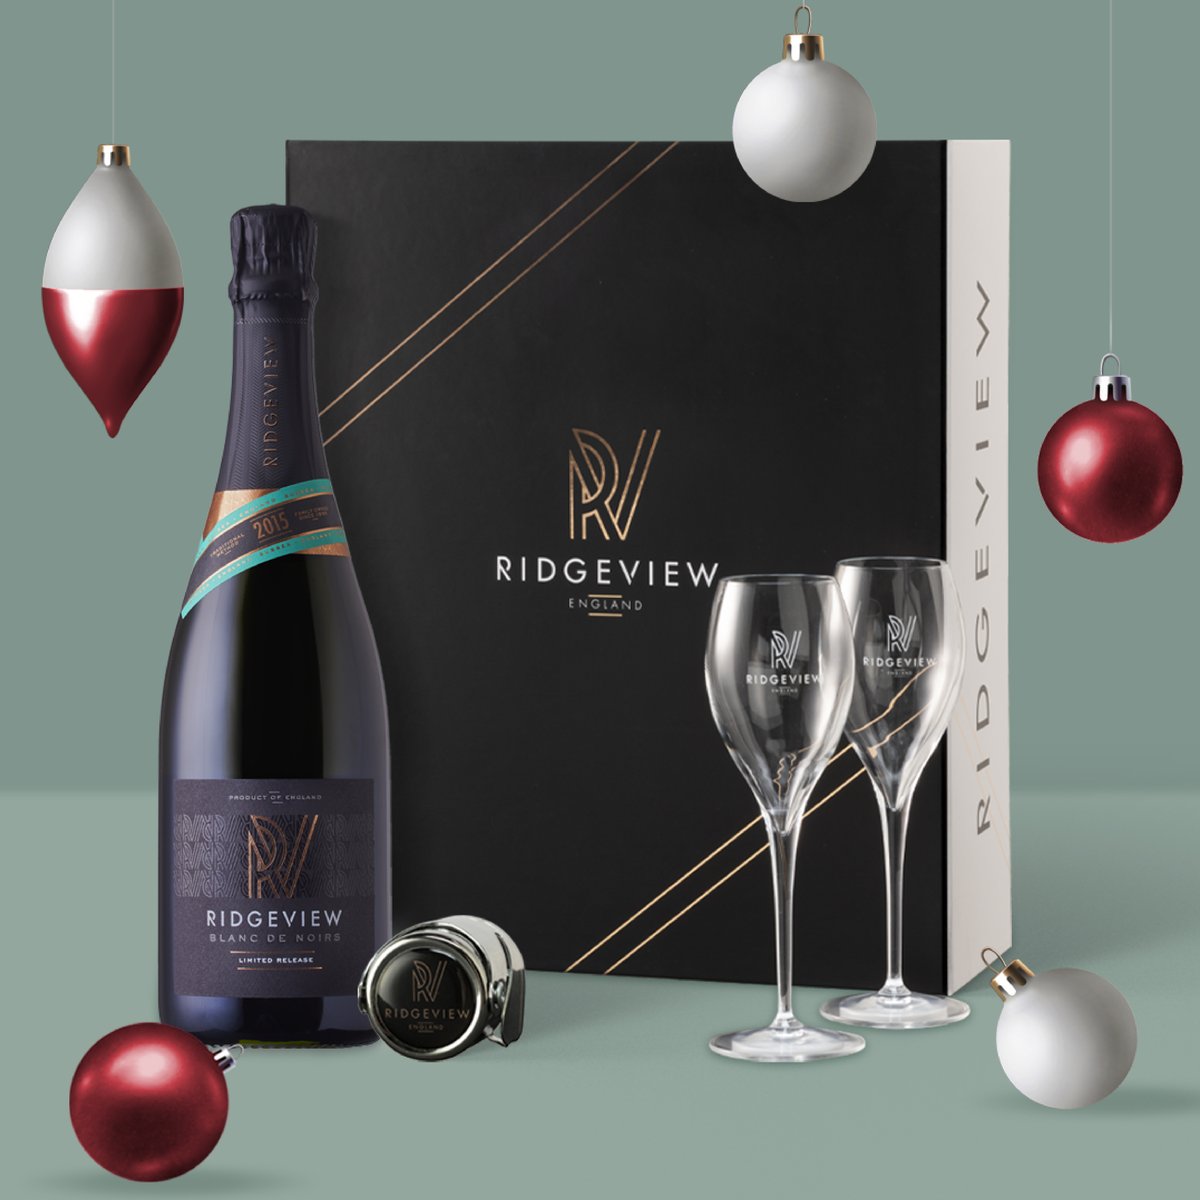 Not long to go! 🎄 Only one week remaining to place your festive orders and enjoy guaranteed Christmas delivery, plus free shipping on all orders over £45.00. Explore the magic of Christmas with Ridgeview: zurl.co/ioU9